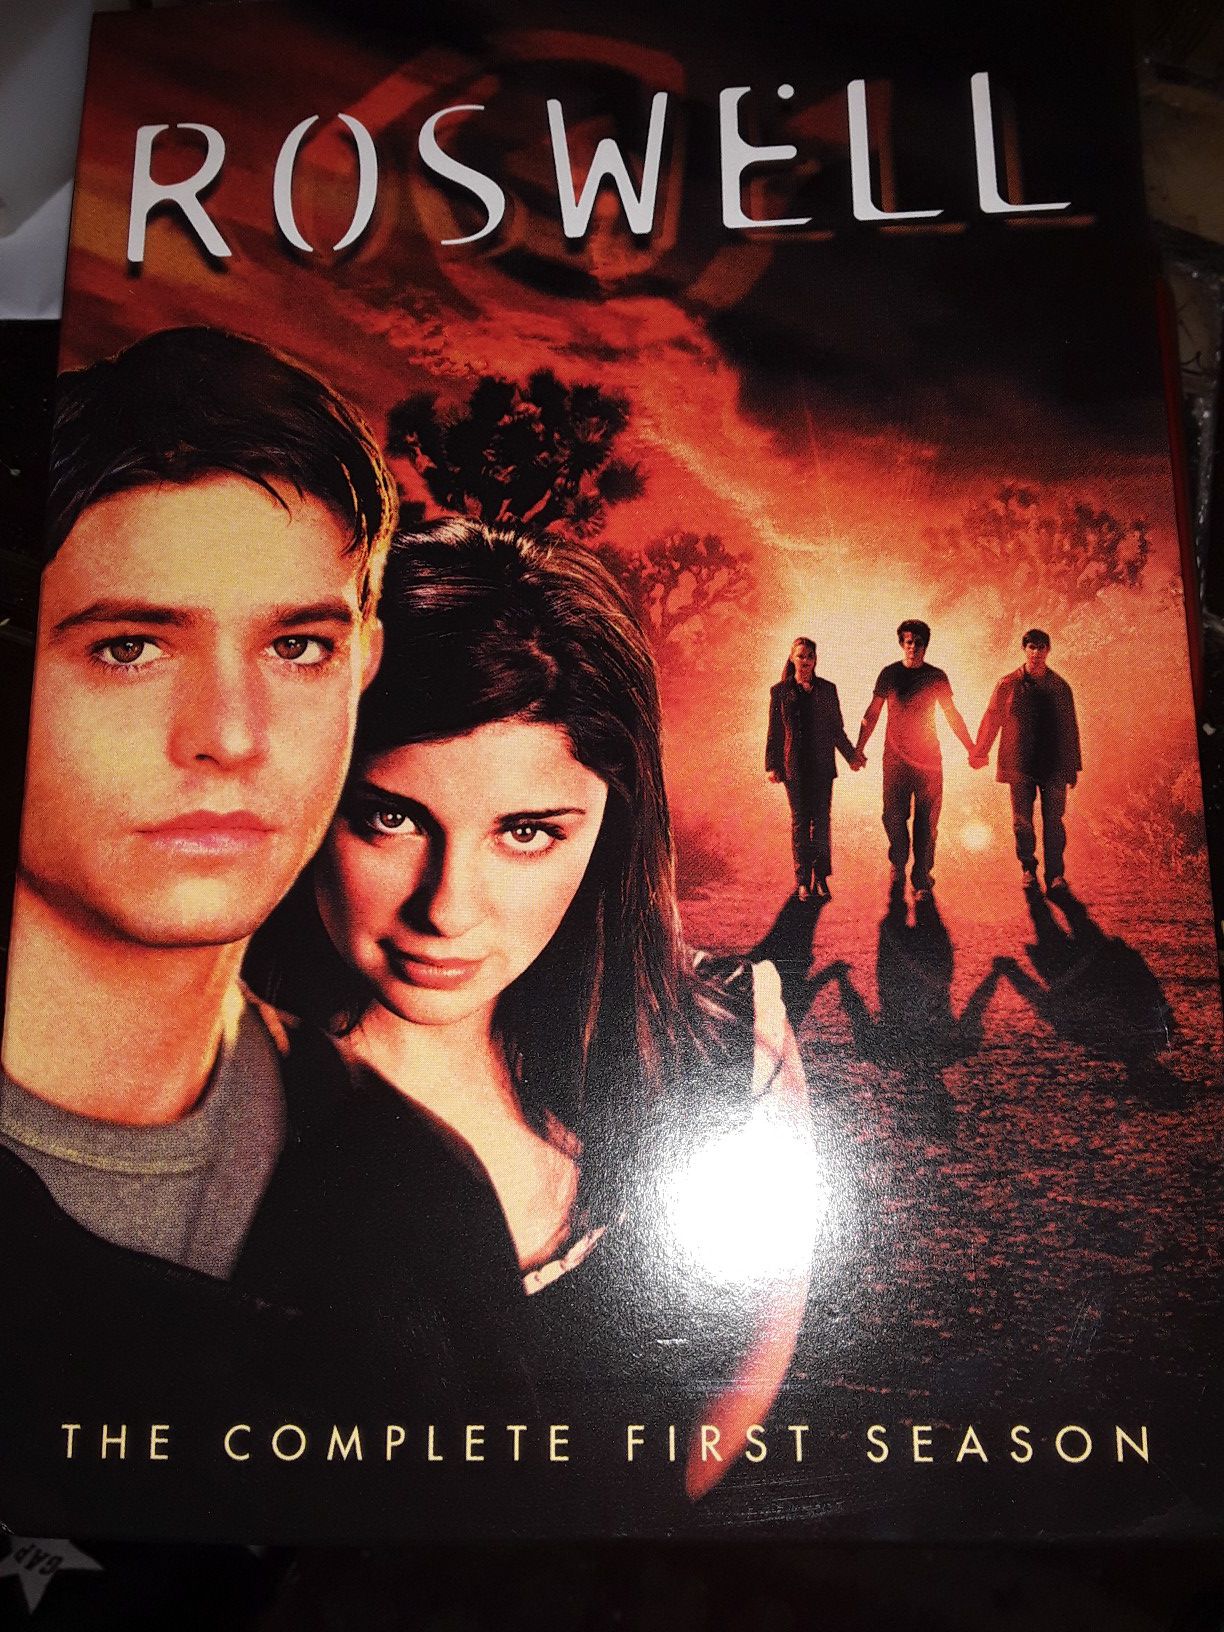 Roswell 6 disc set